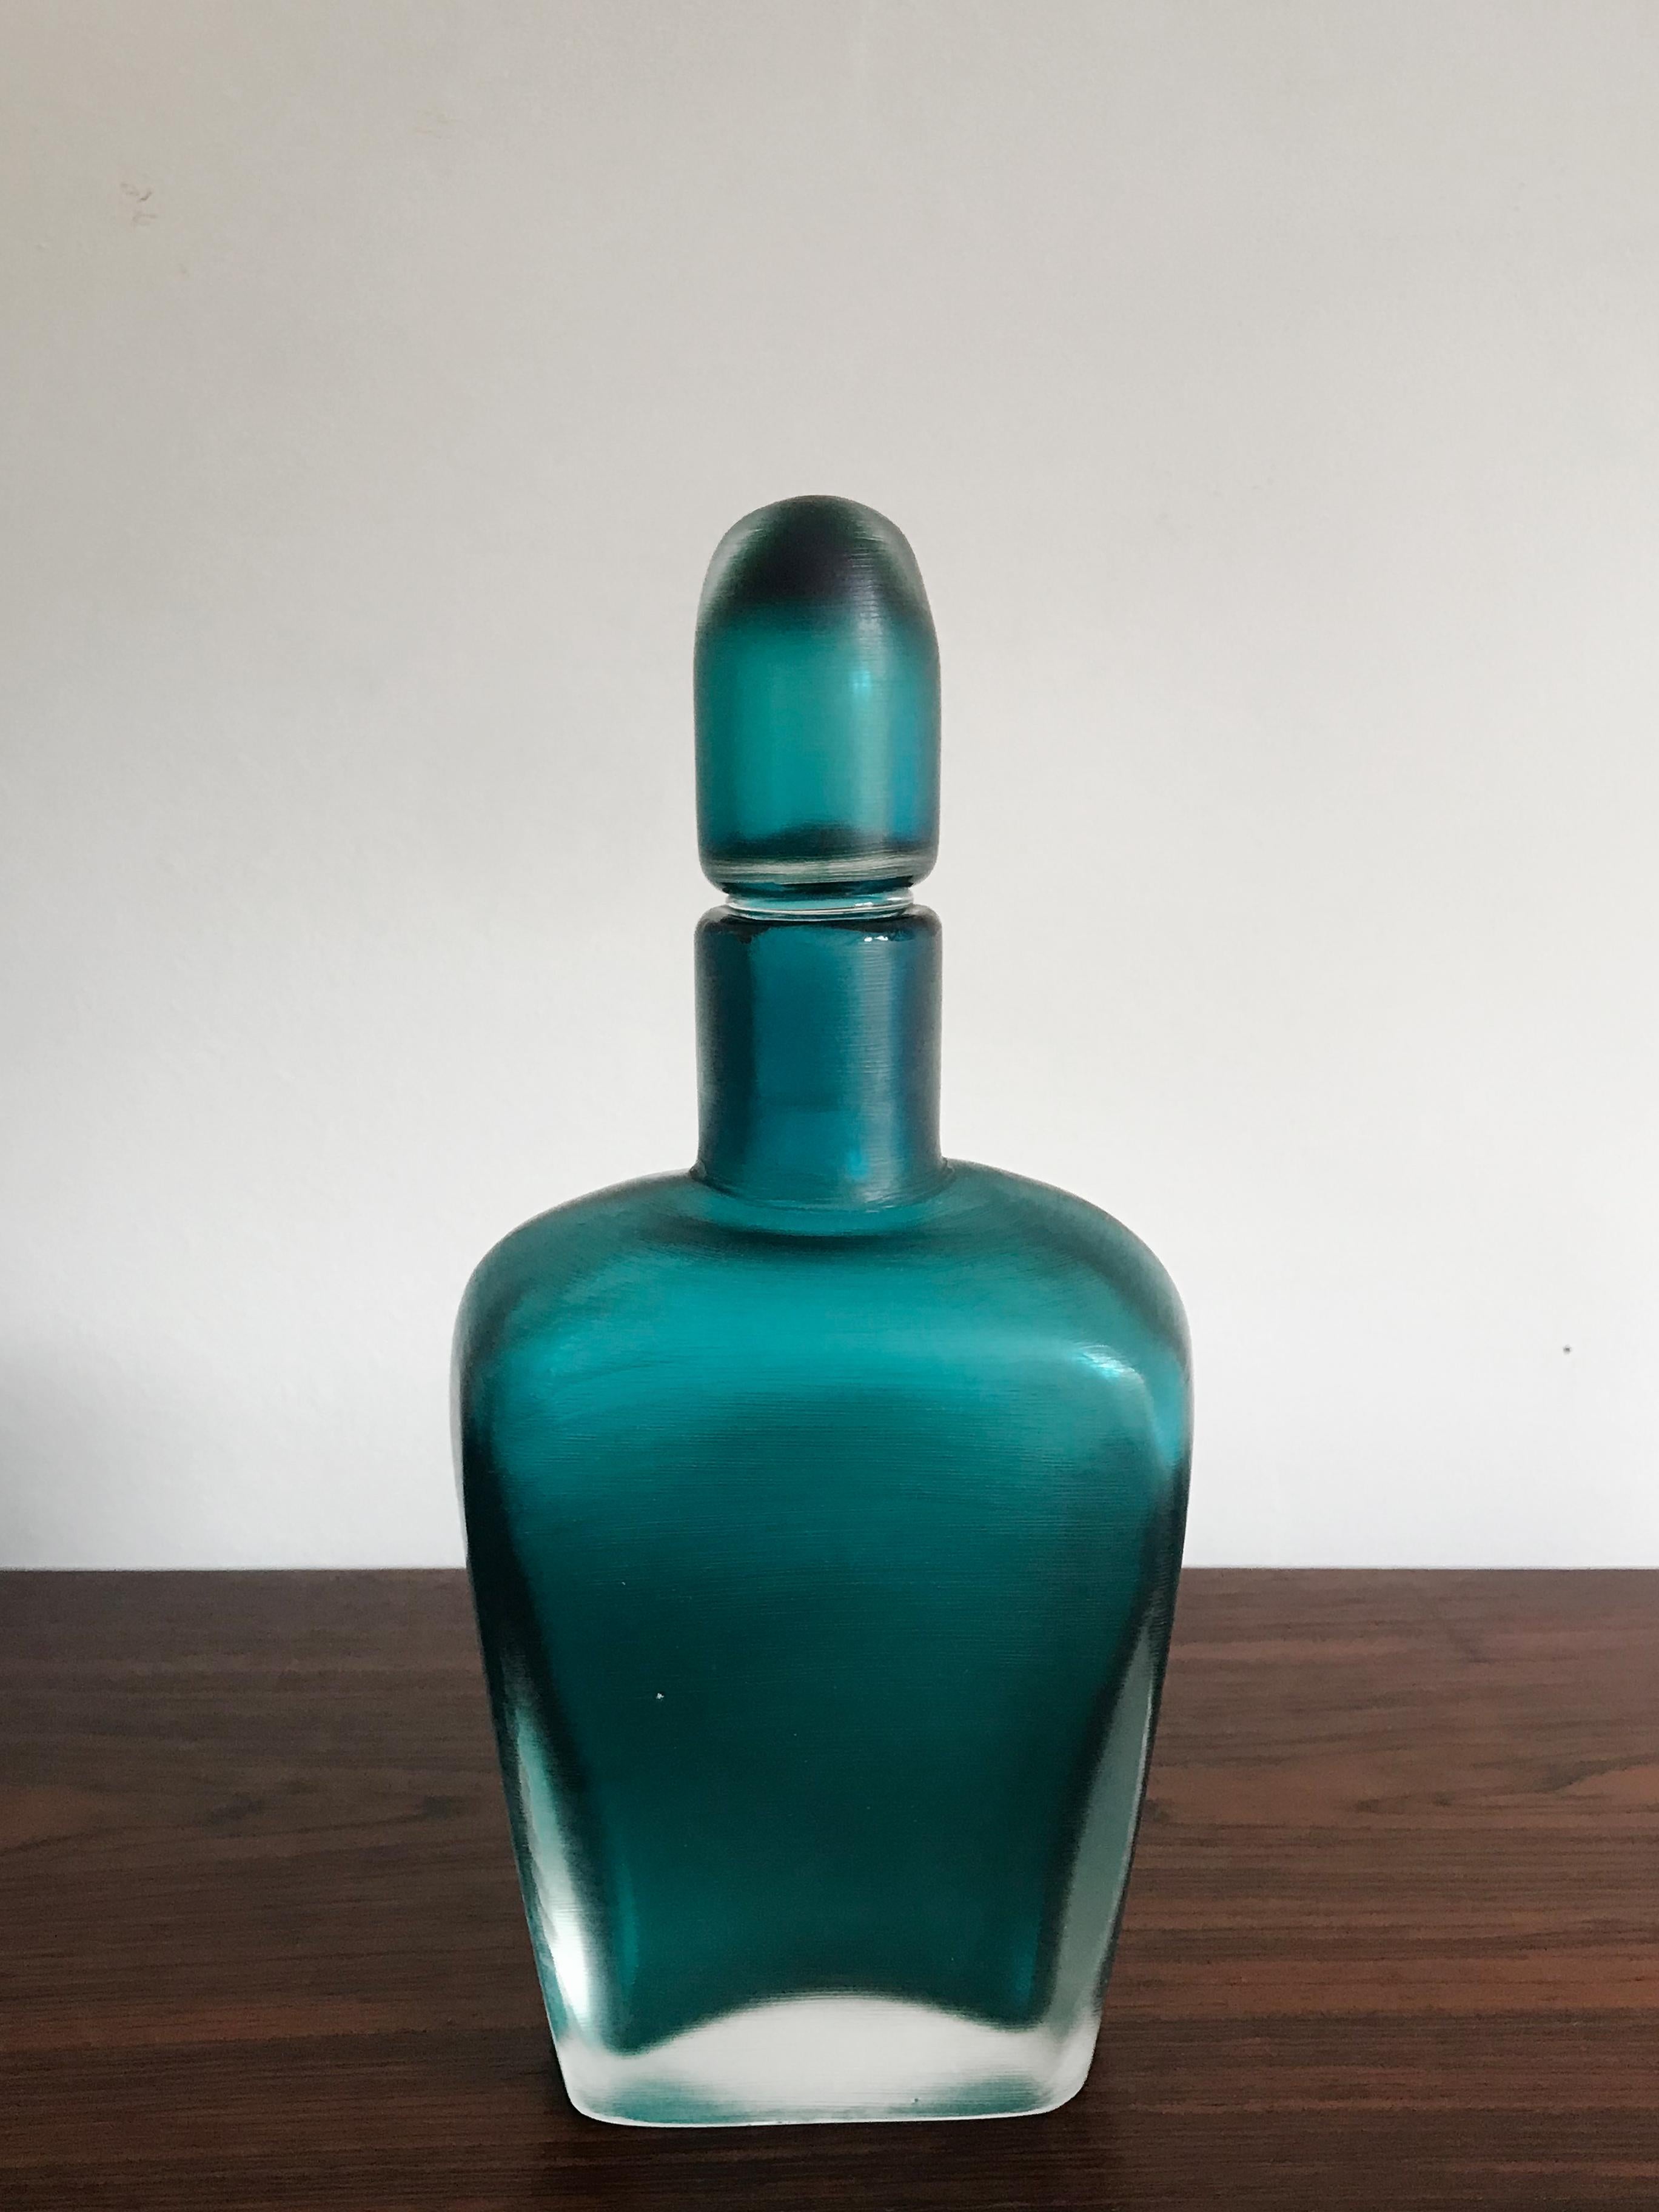 Italian light blue glass bottle with stopper, “Incisi” series, submerged glass with surface entirely worked by grinding produced by Venini Murano, Venini Italy 81 engraved signature under the base, Italy 1981

Please note that the item is original